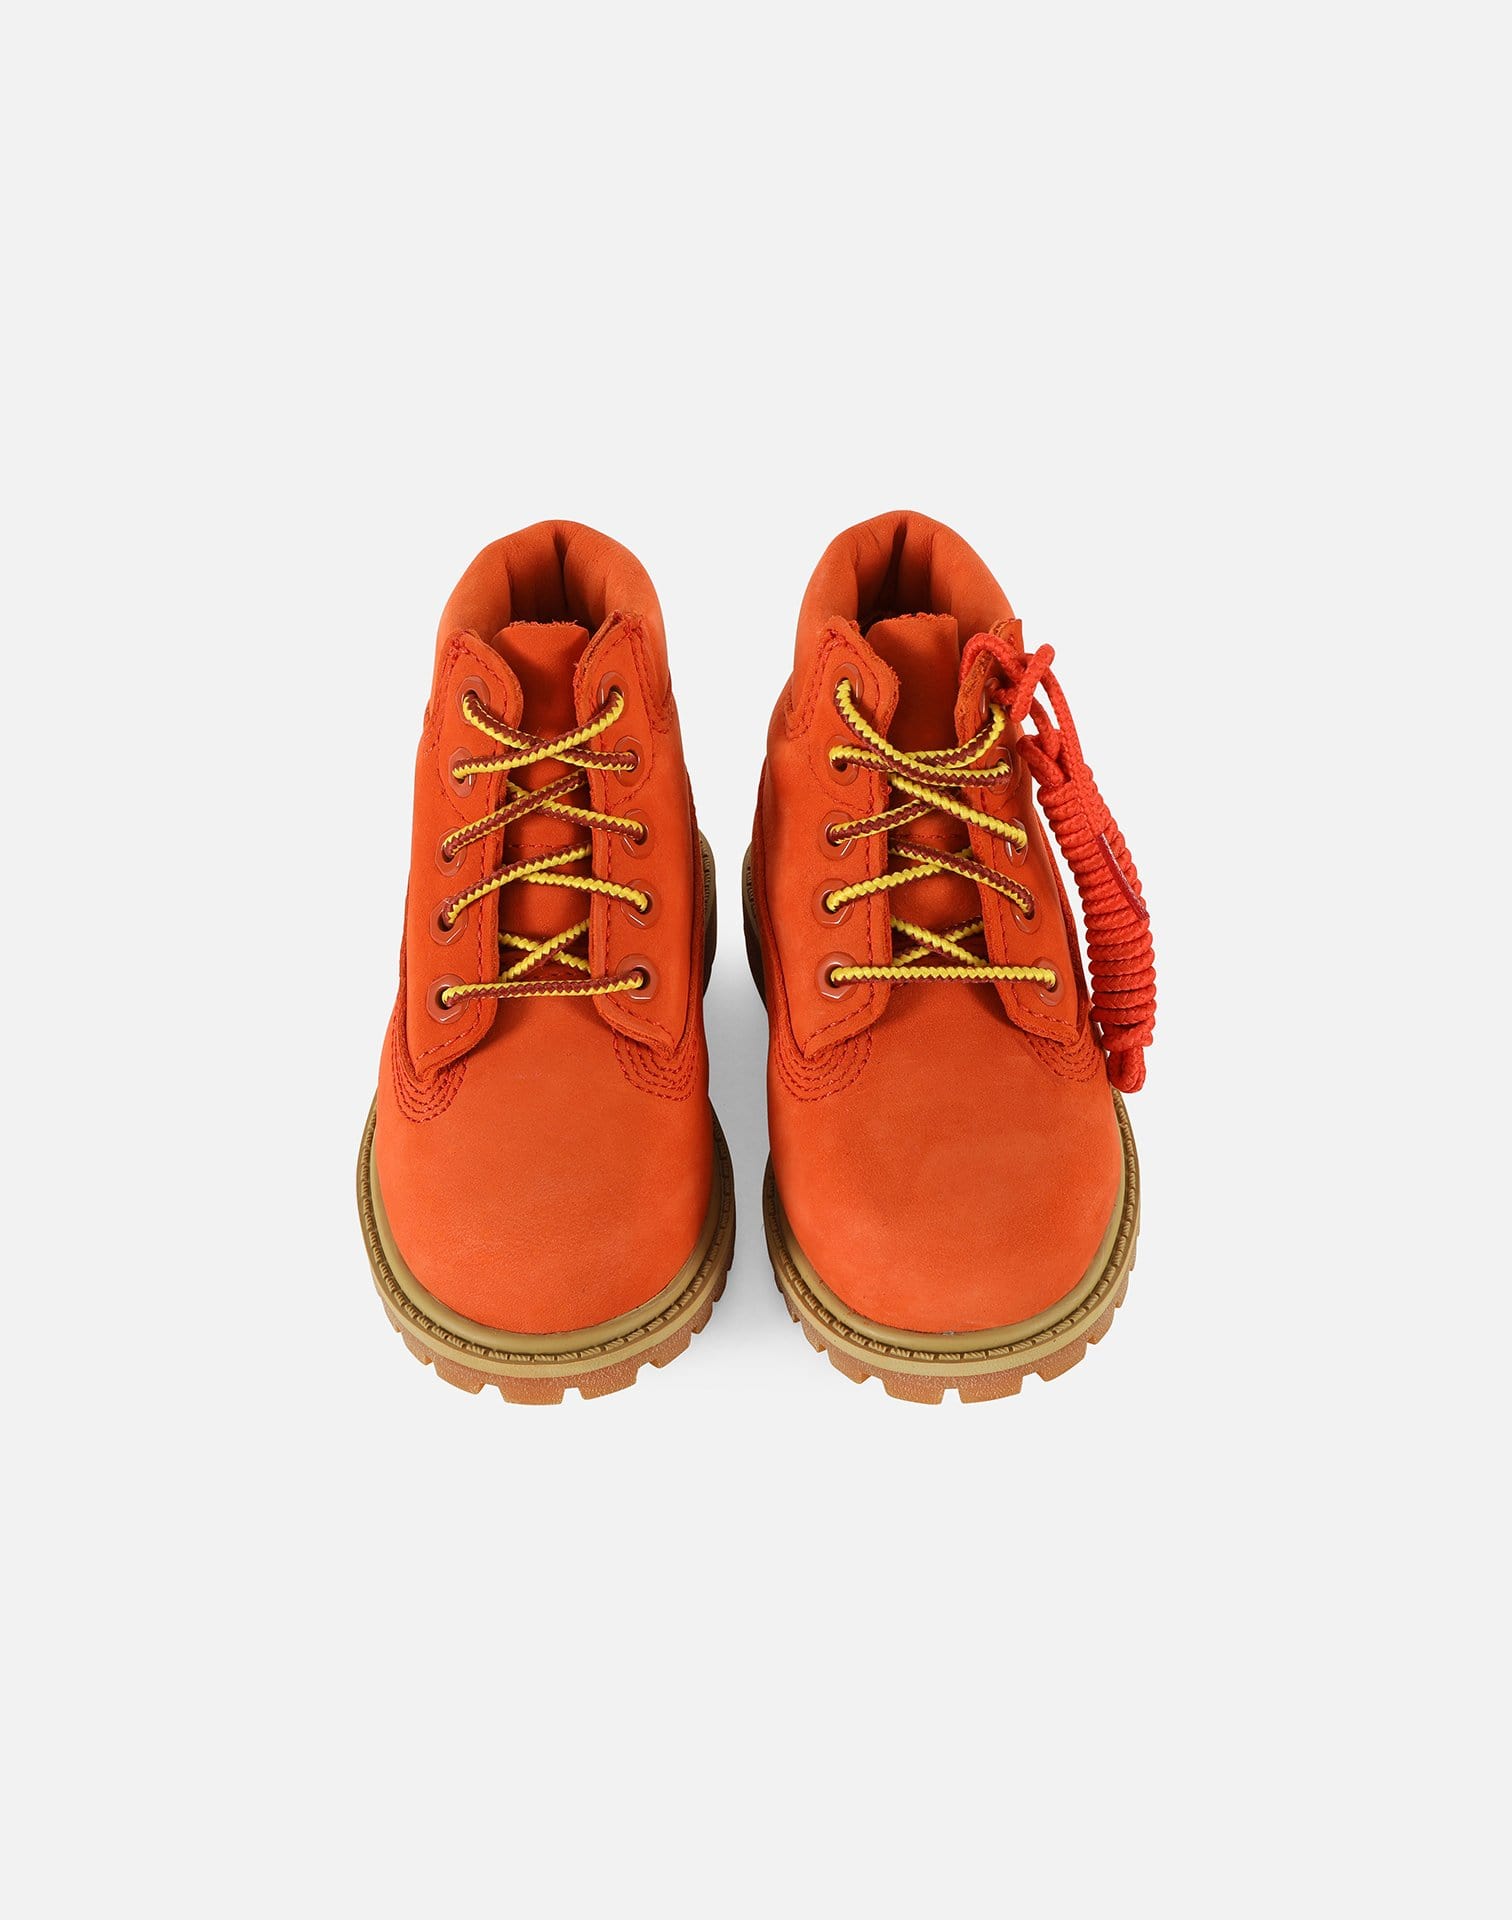 red timberland boots for toddlers